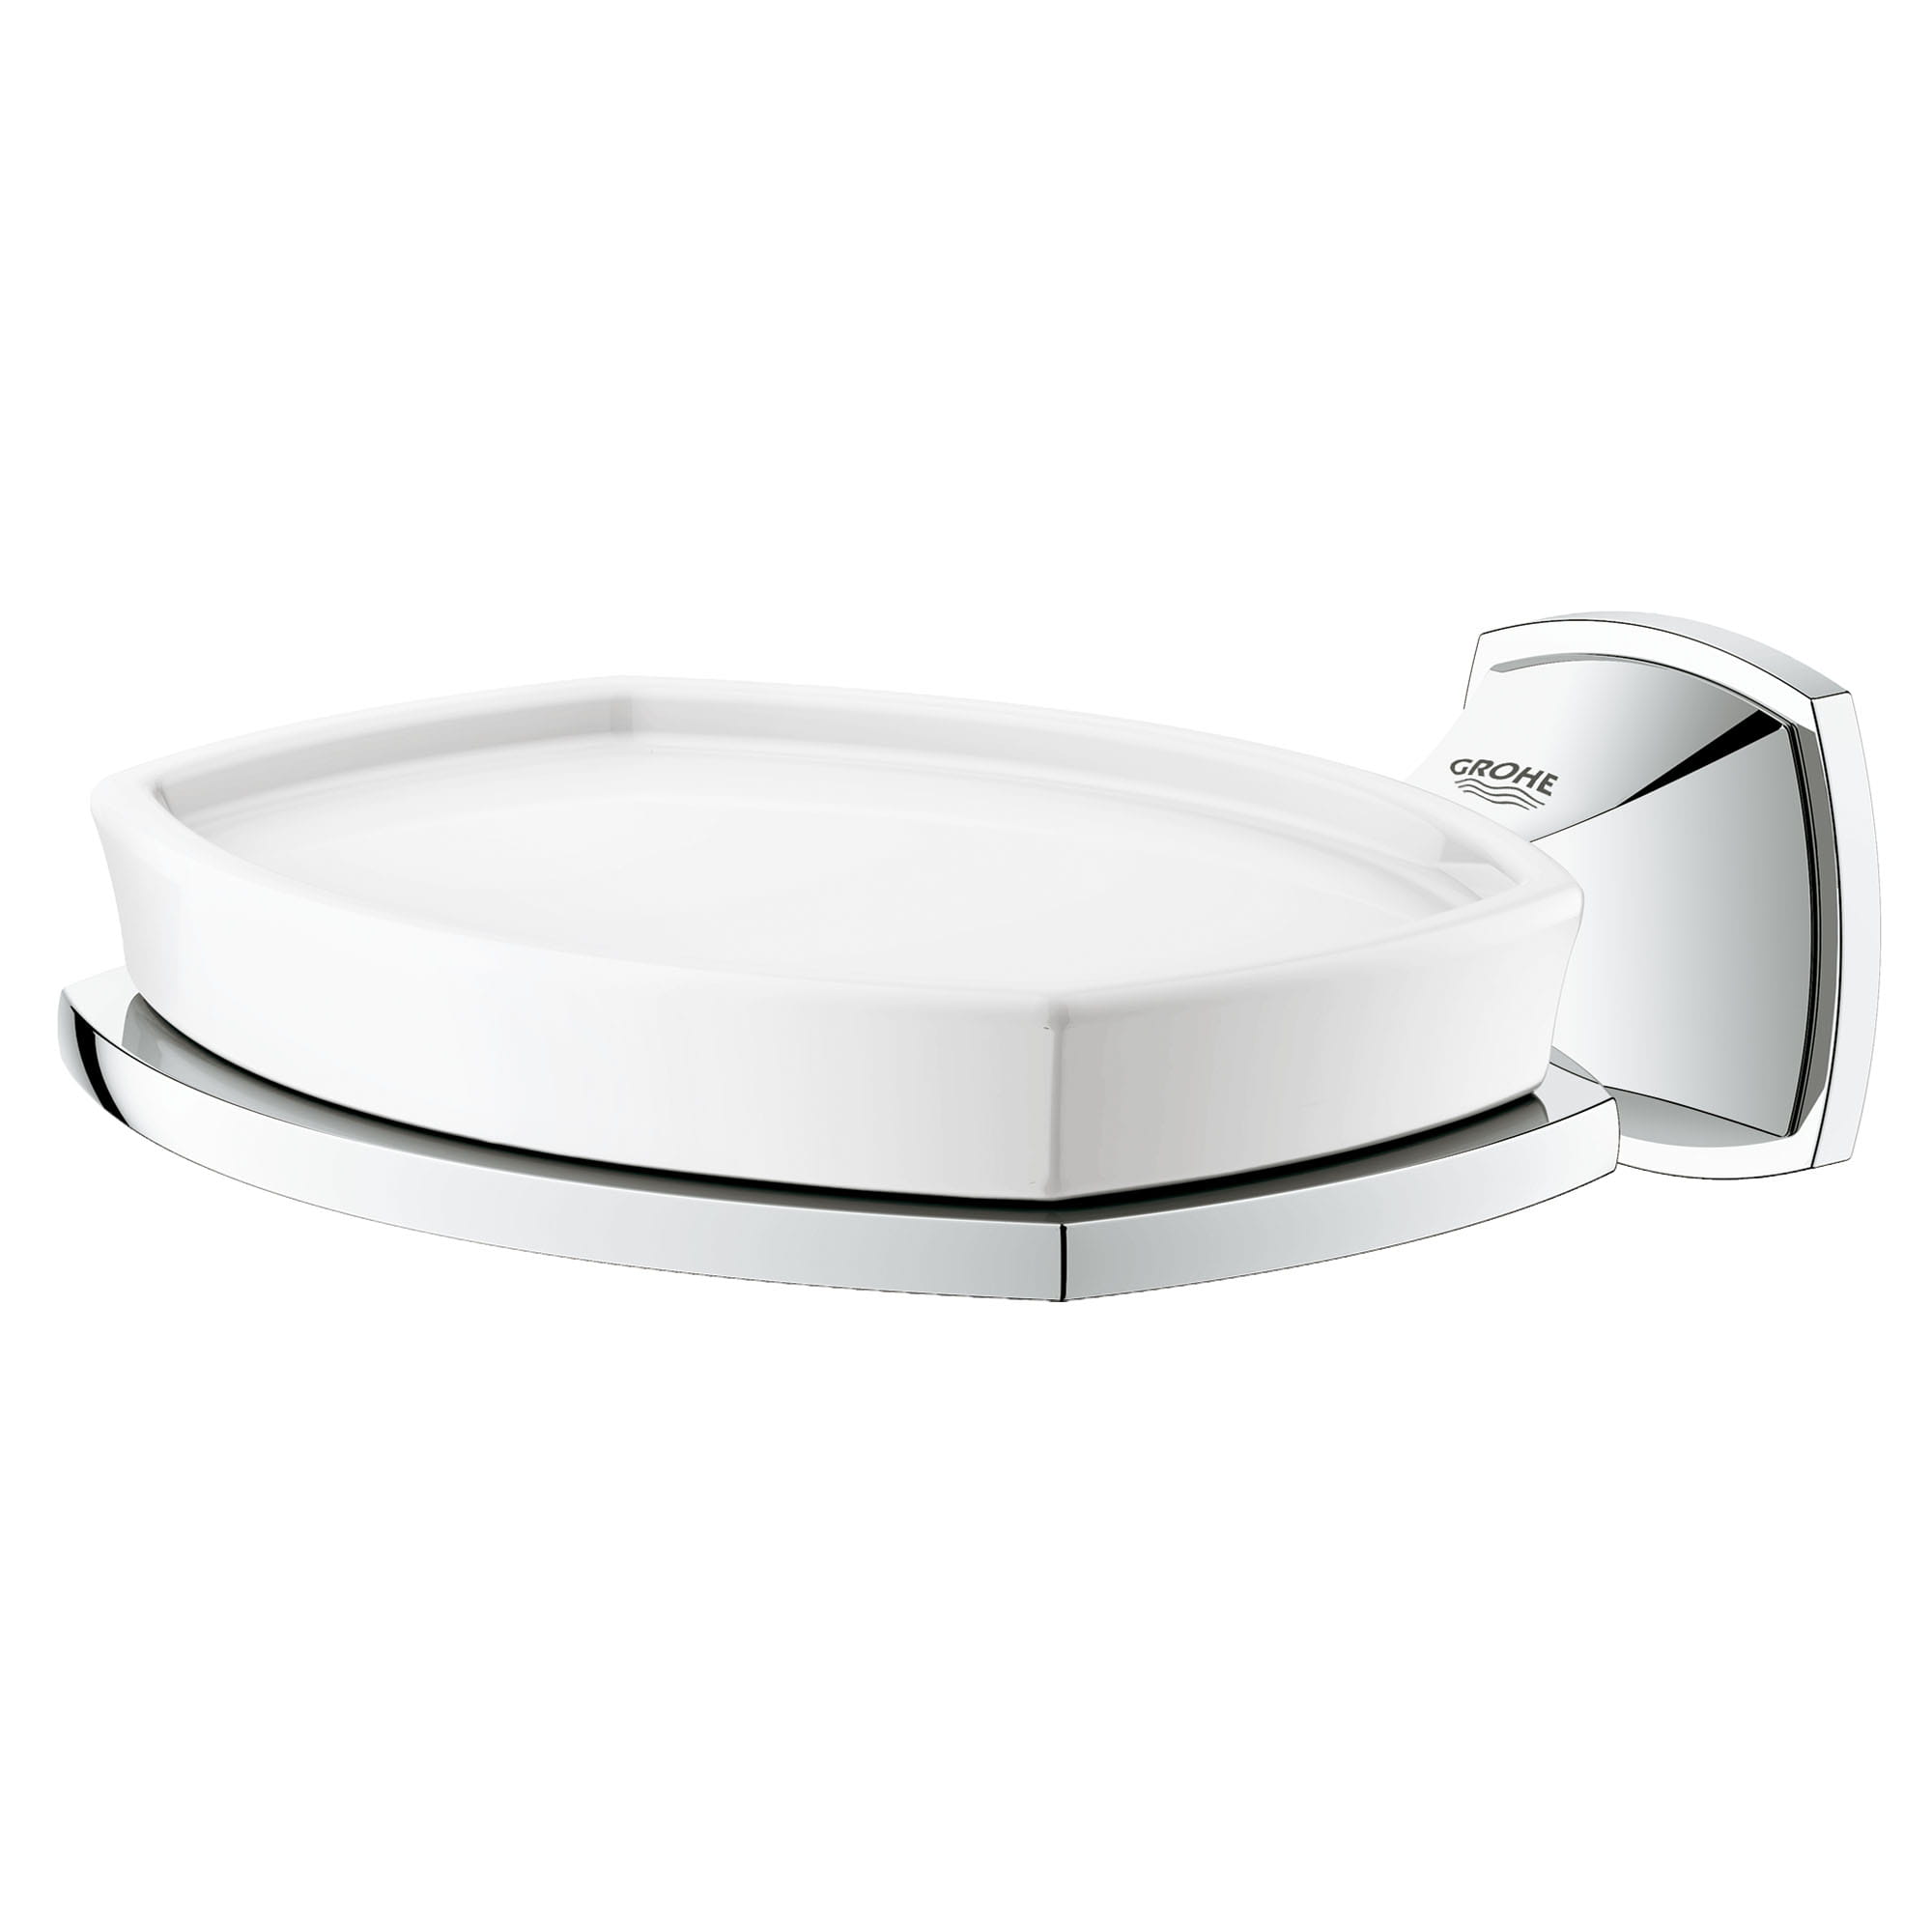 Ceramic Soap Dish with Holder GROHE CHROME